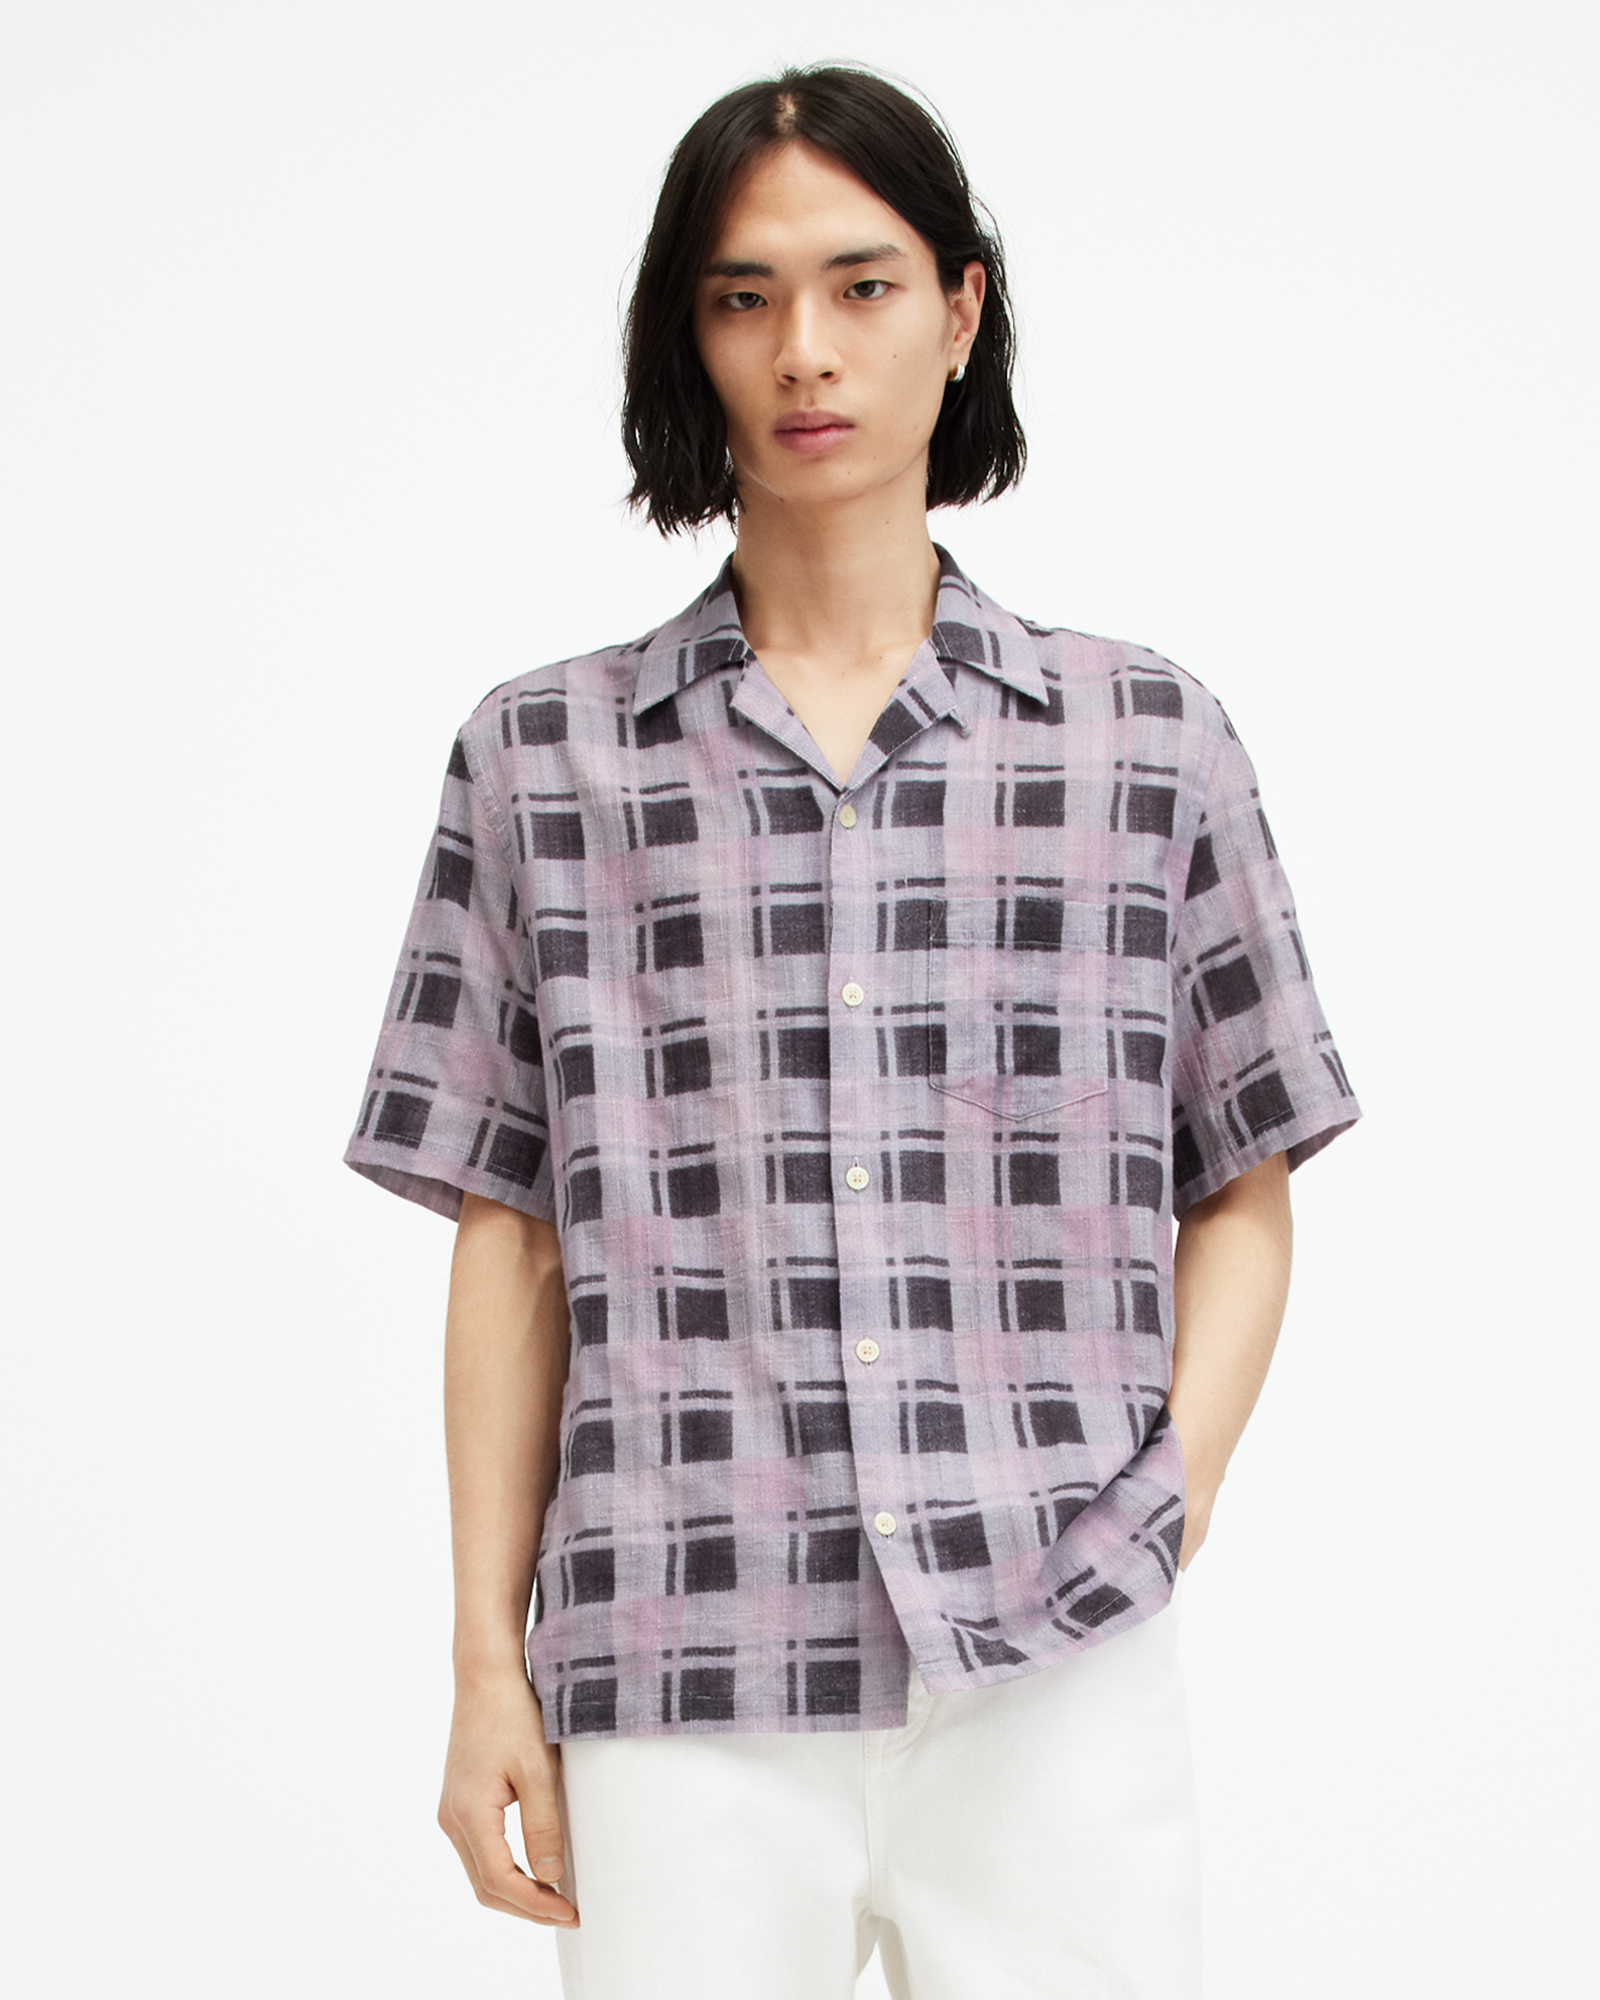 AllSaints Big Sur Checked Relaxed Fit Shirt,, SUGARED LILAC